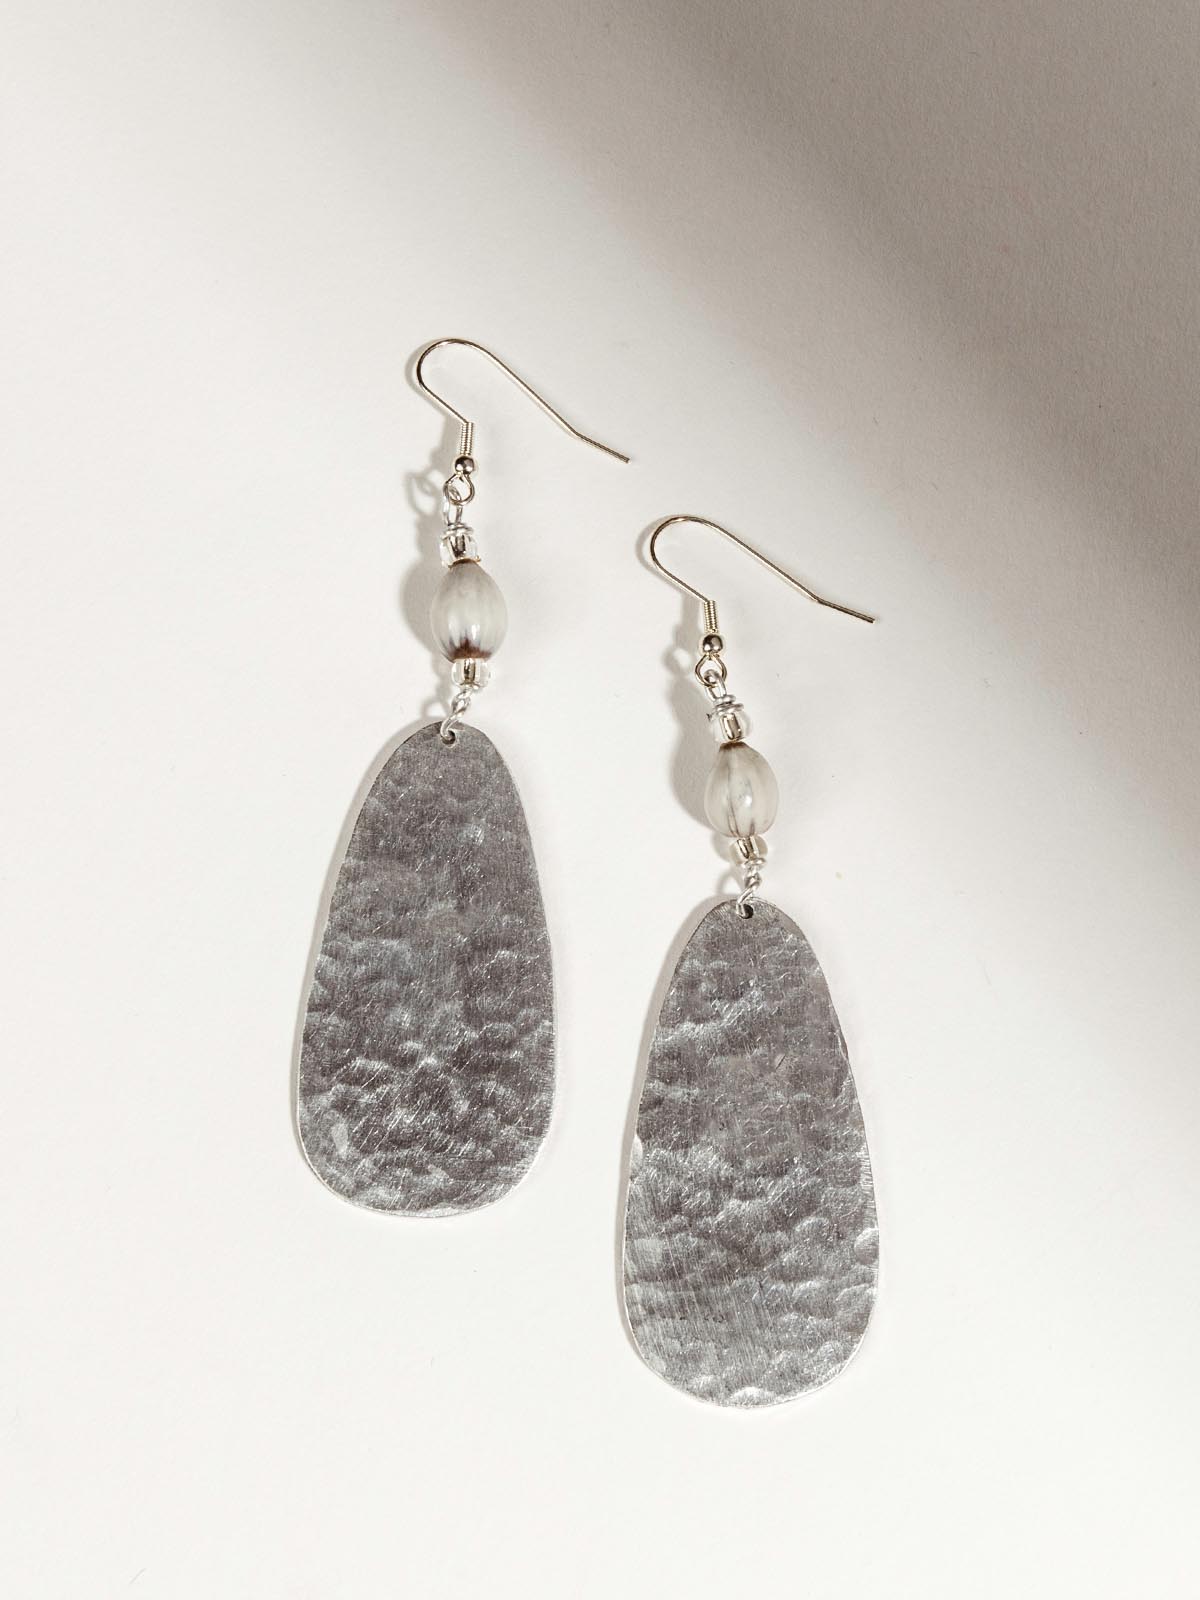 Aluminum earrings laid out over a white background